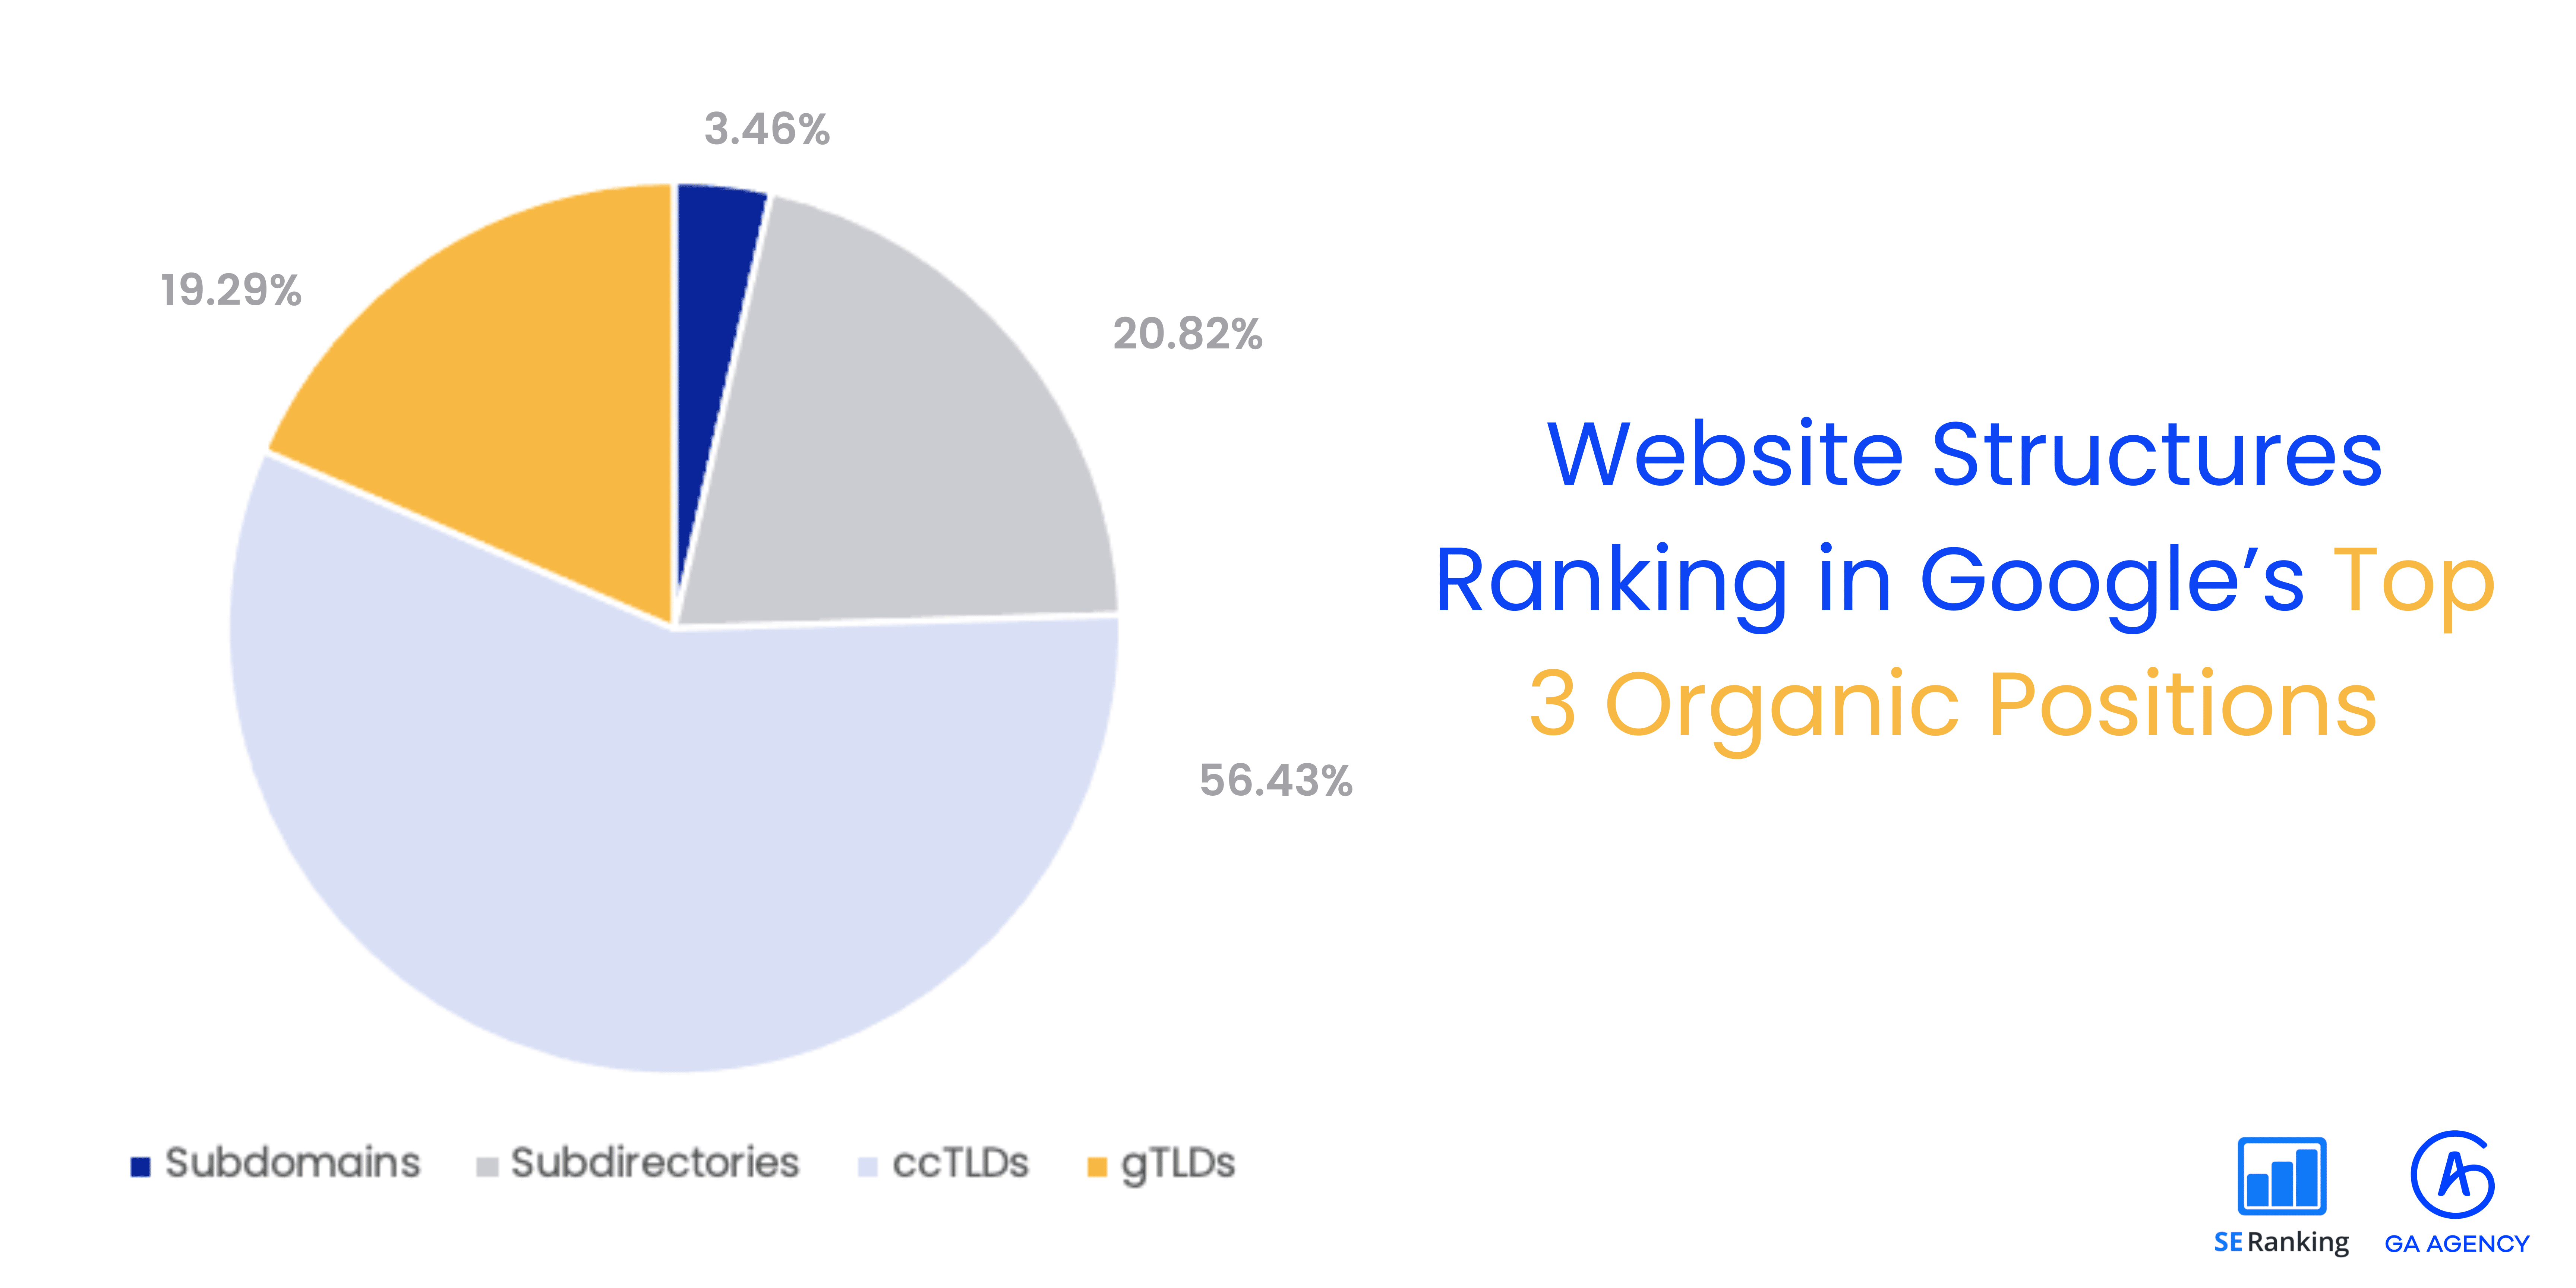 Website structures in top 3 organic positions